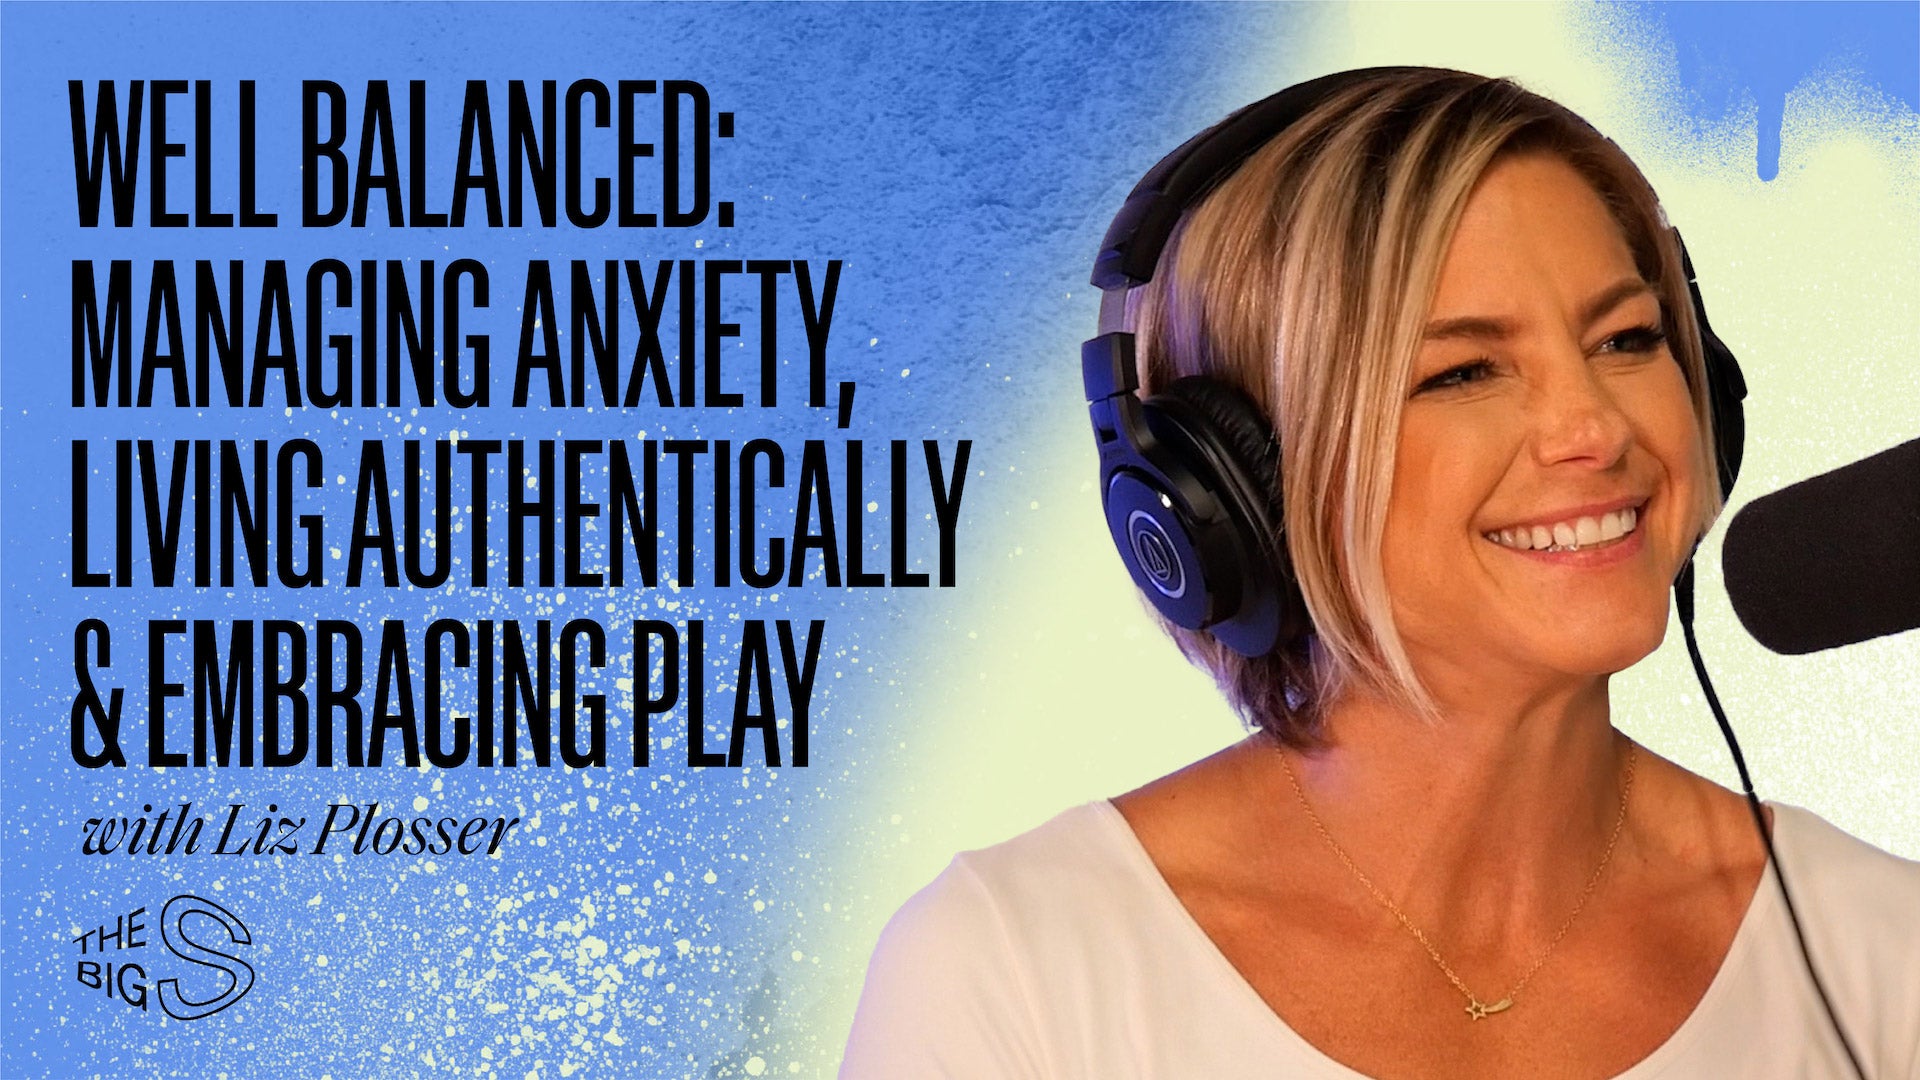 55. Well Balanced: Managing Anxiety, Living Authentically & Embracing Play with Liz Plosser